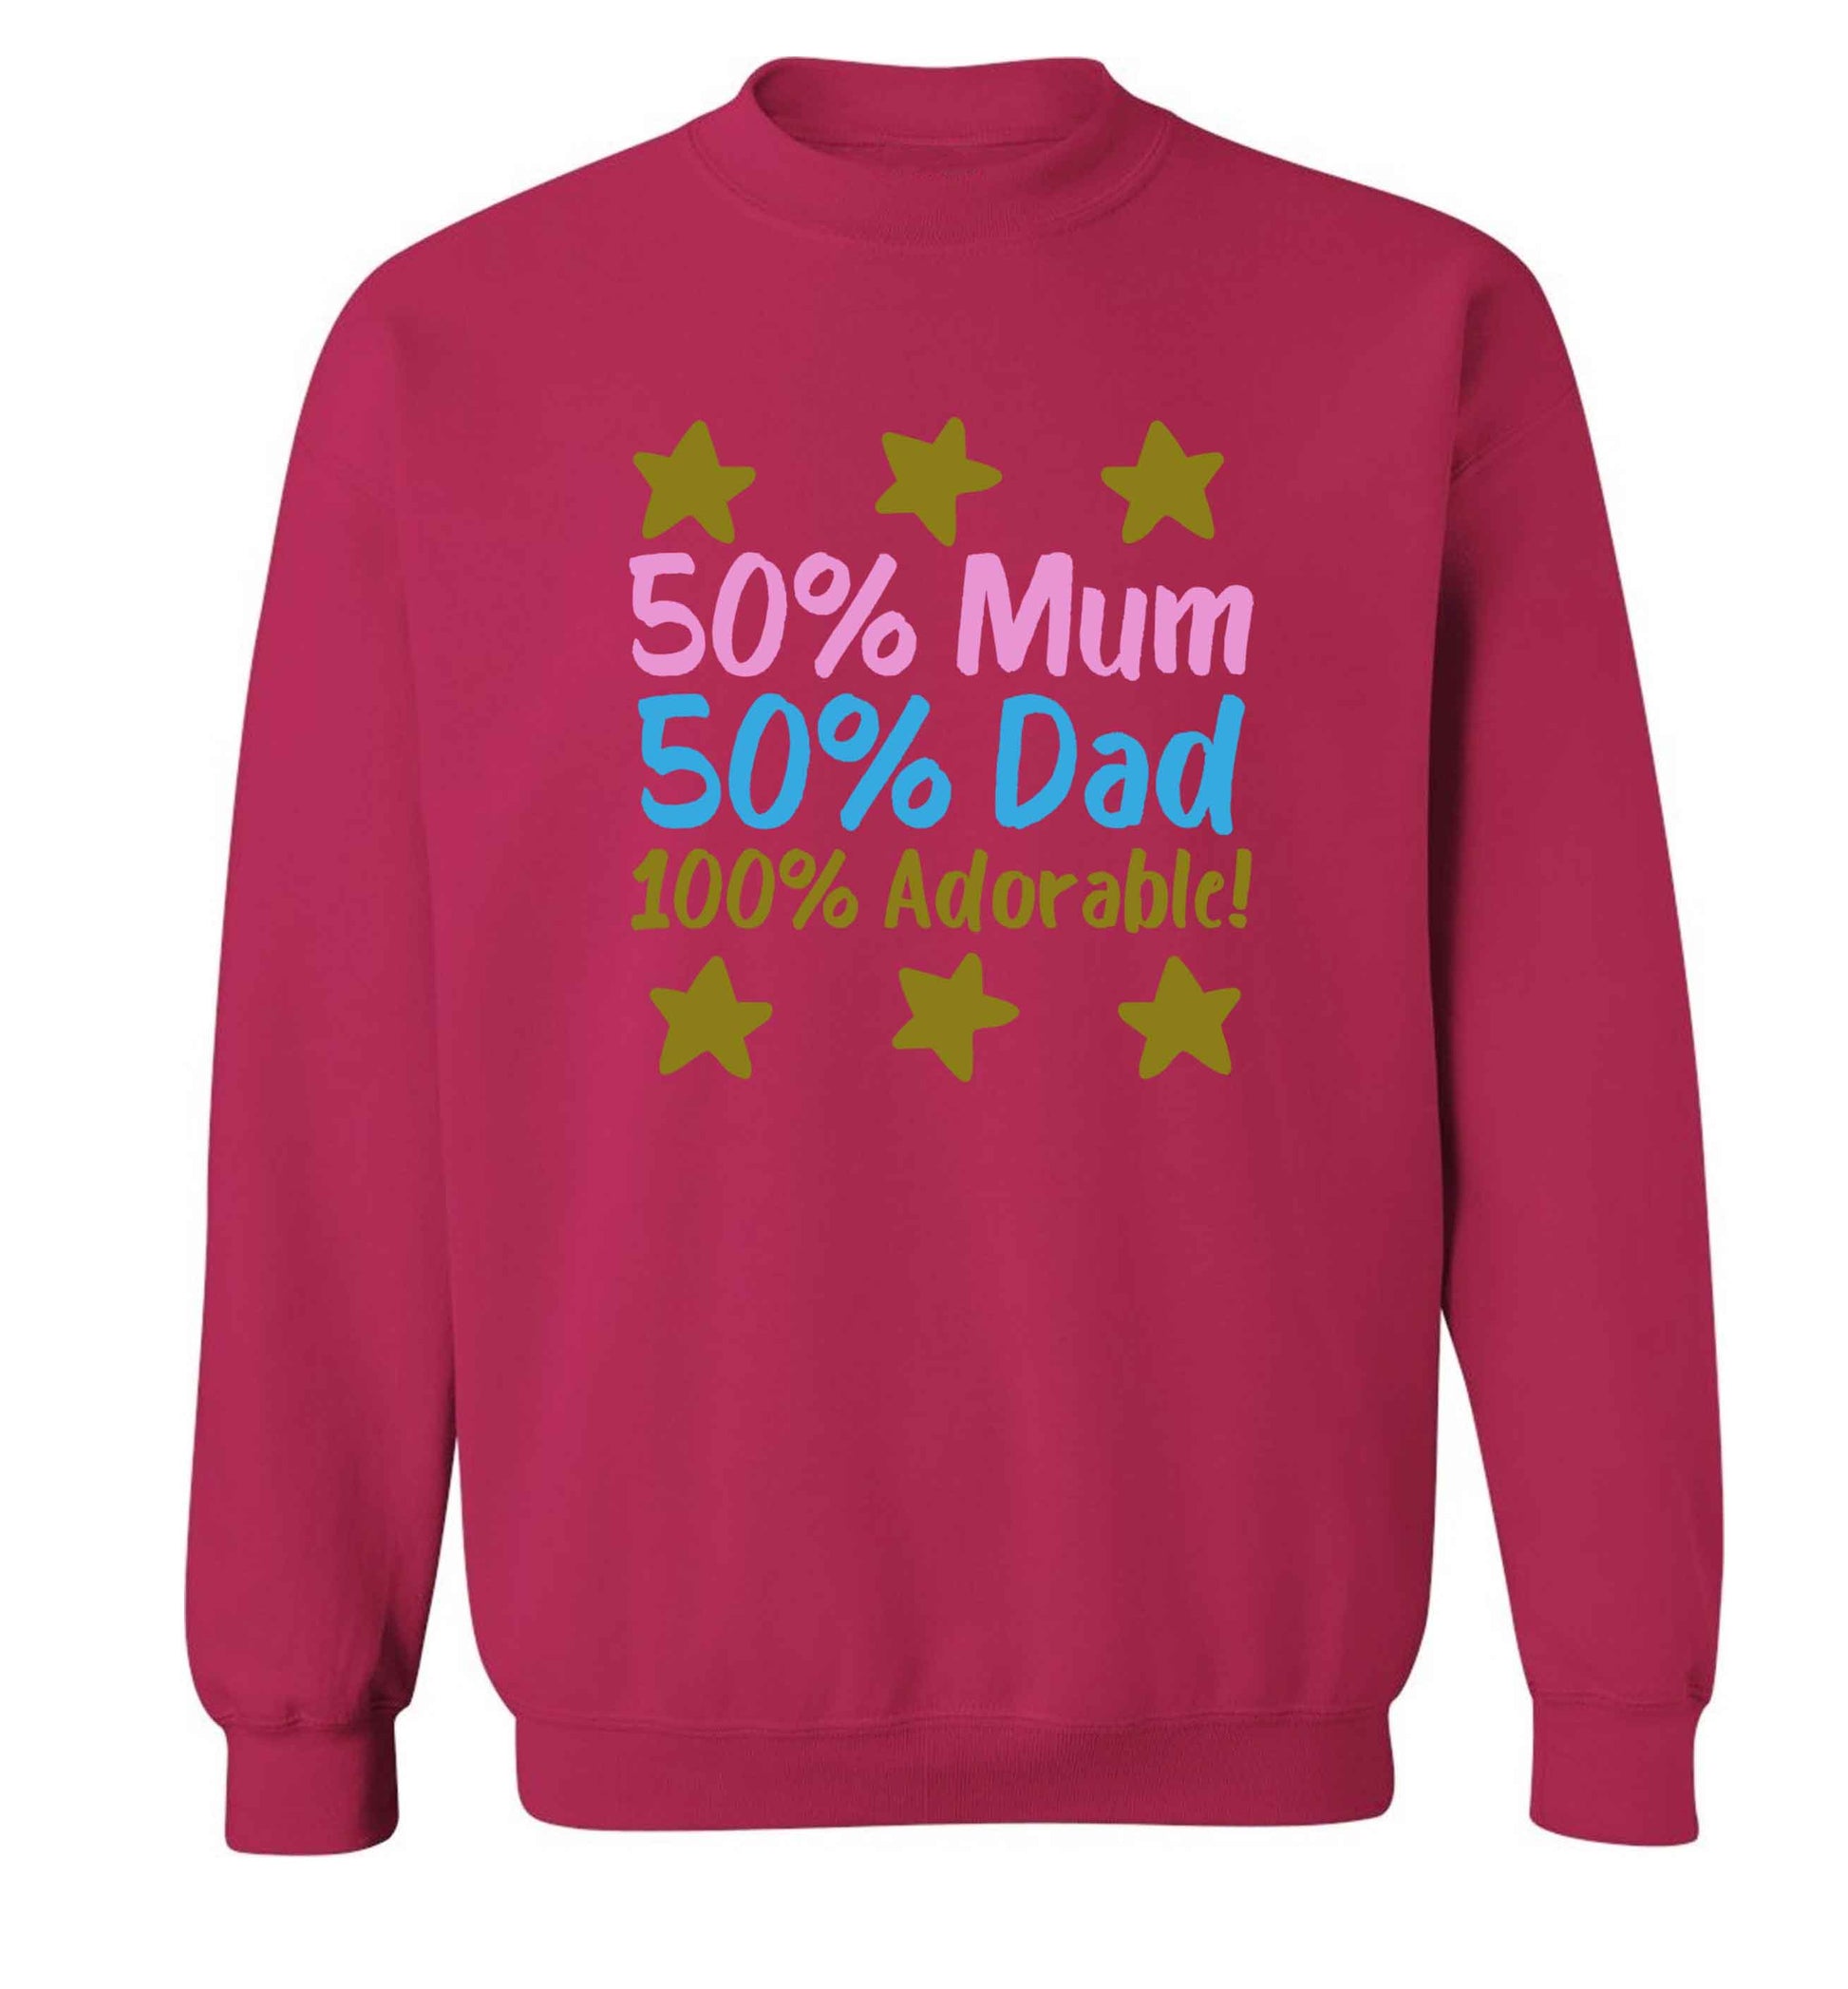 50% mum 50% dad 100% adorable adult's unisex pink sweater 2XL